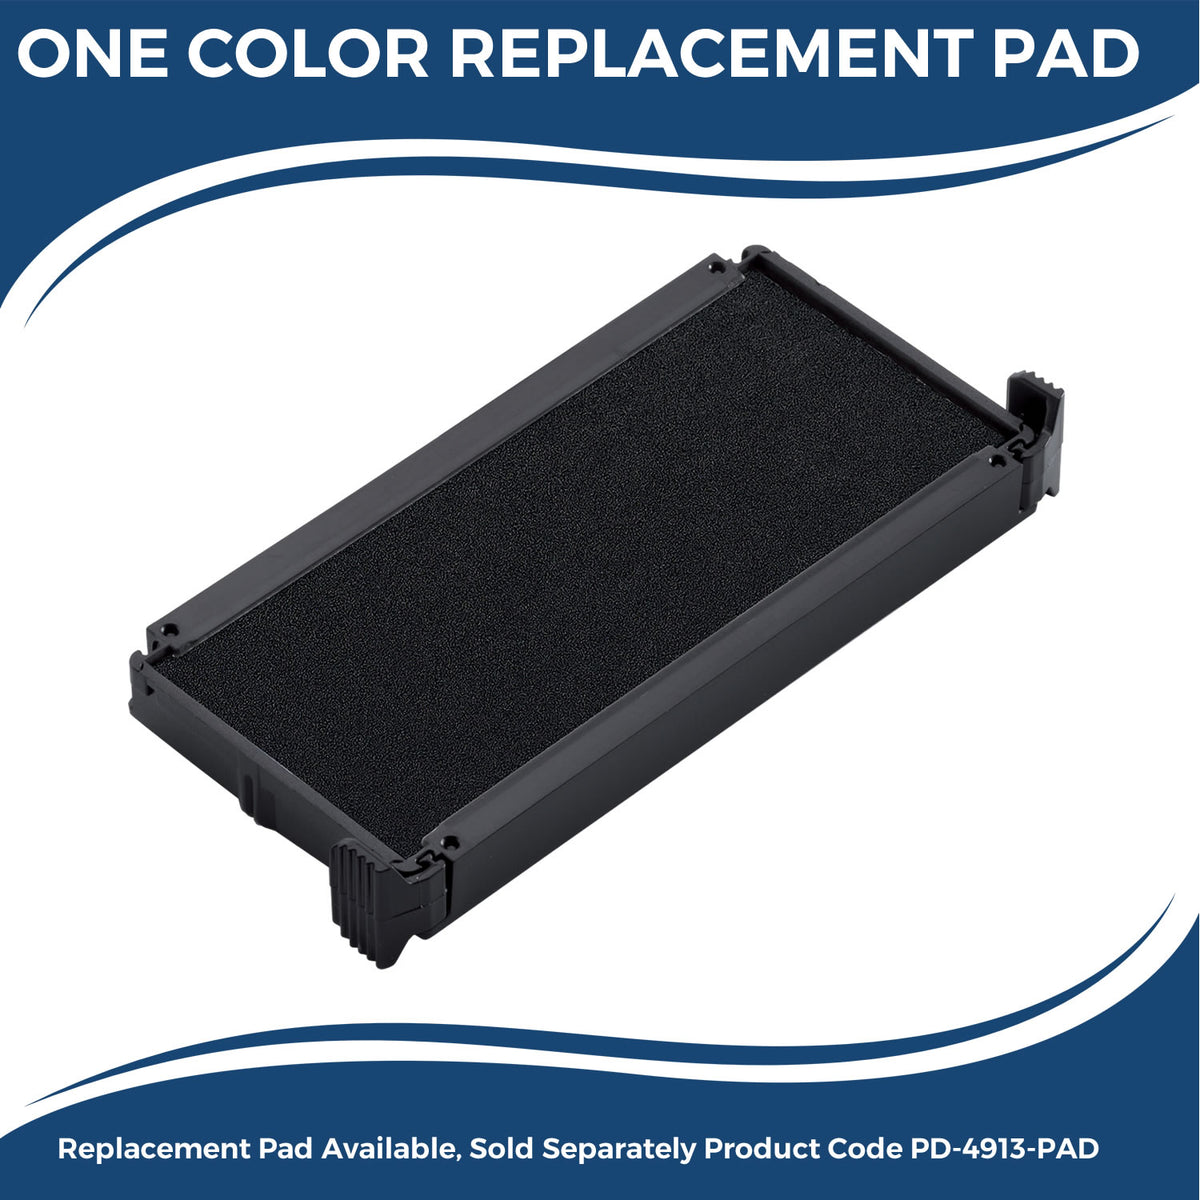 Large Self Inking Advanced Placement Stamp 4634S Large Replacment Pad